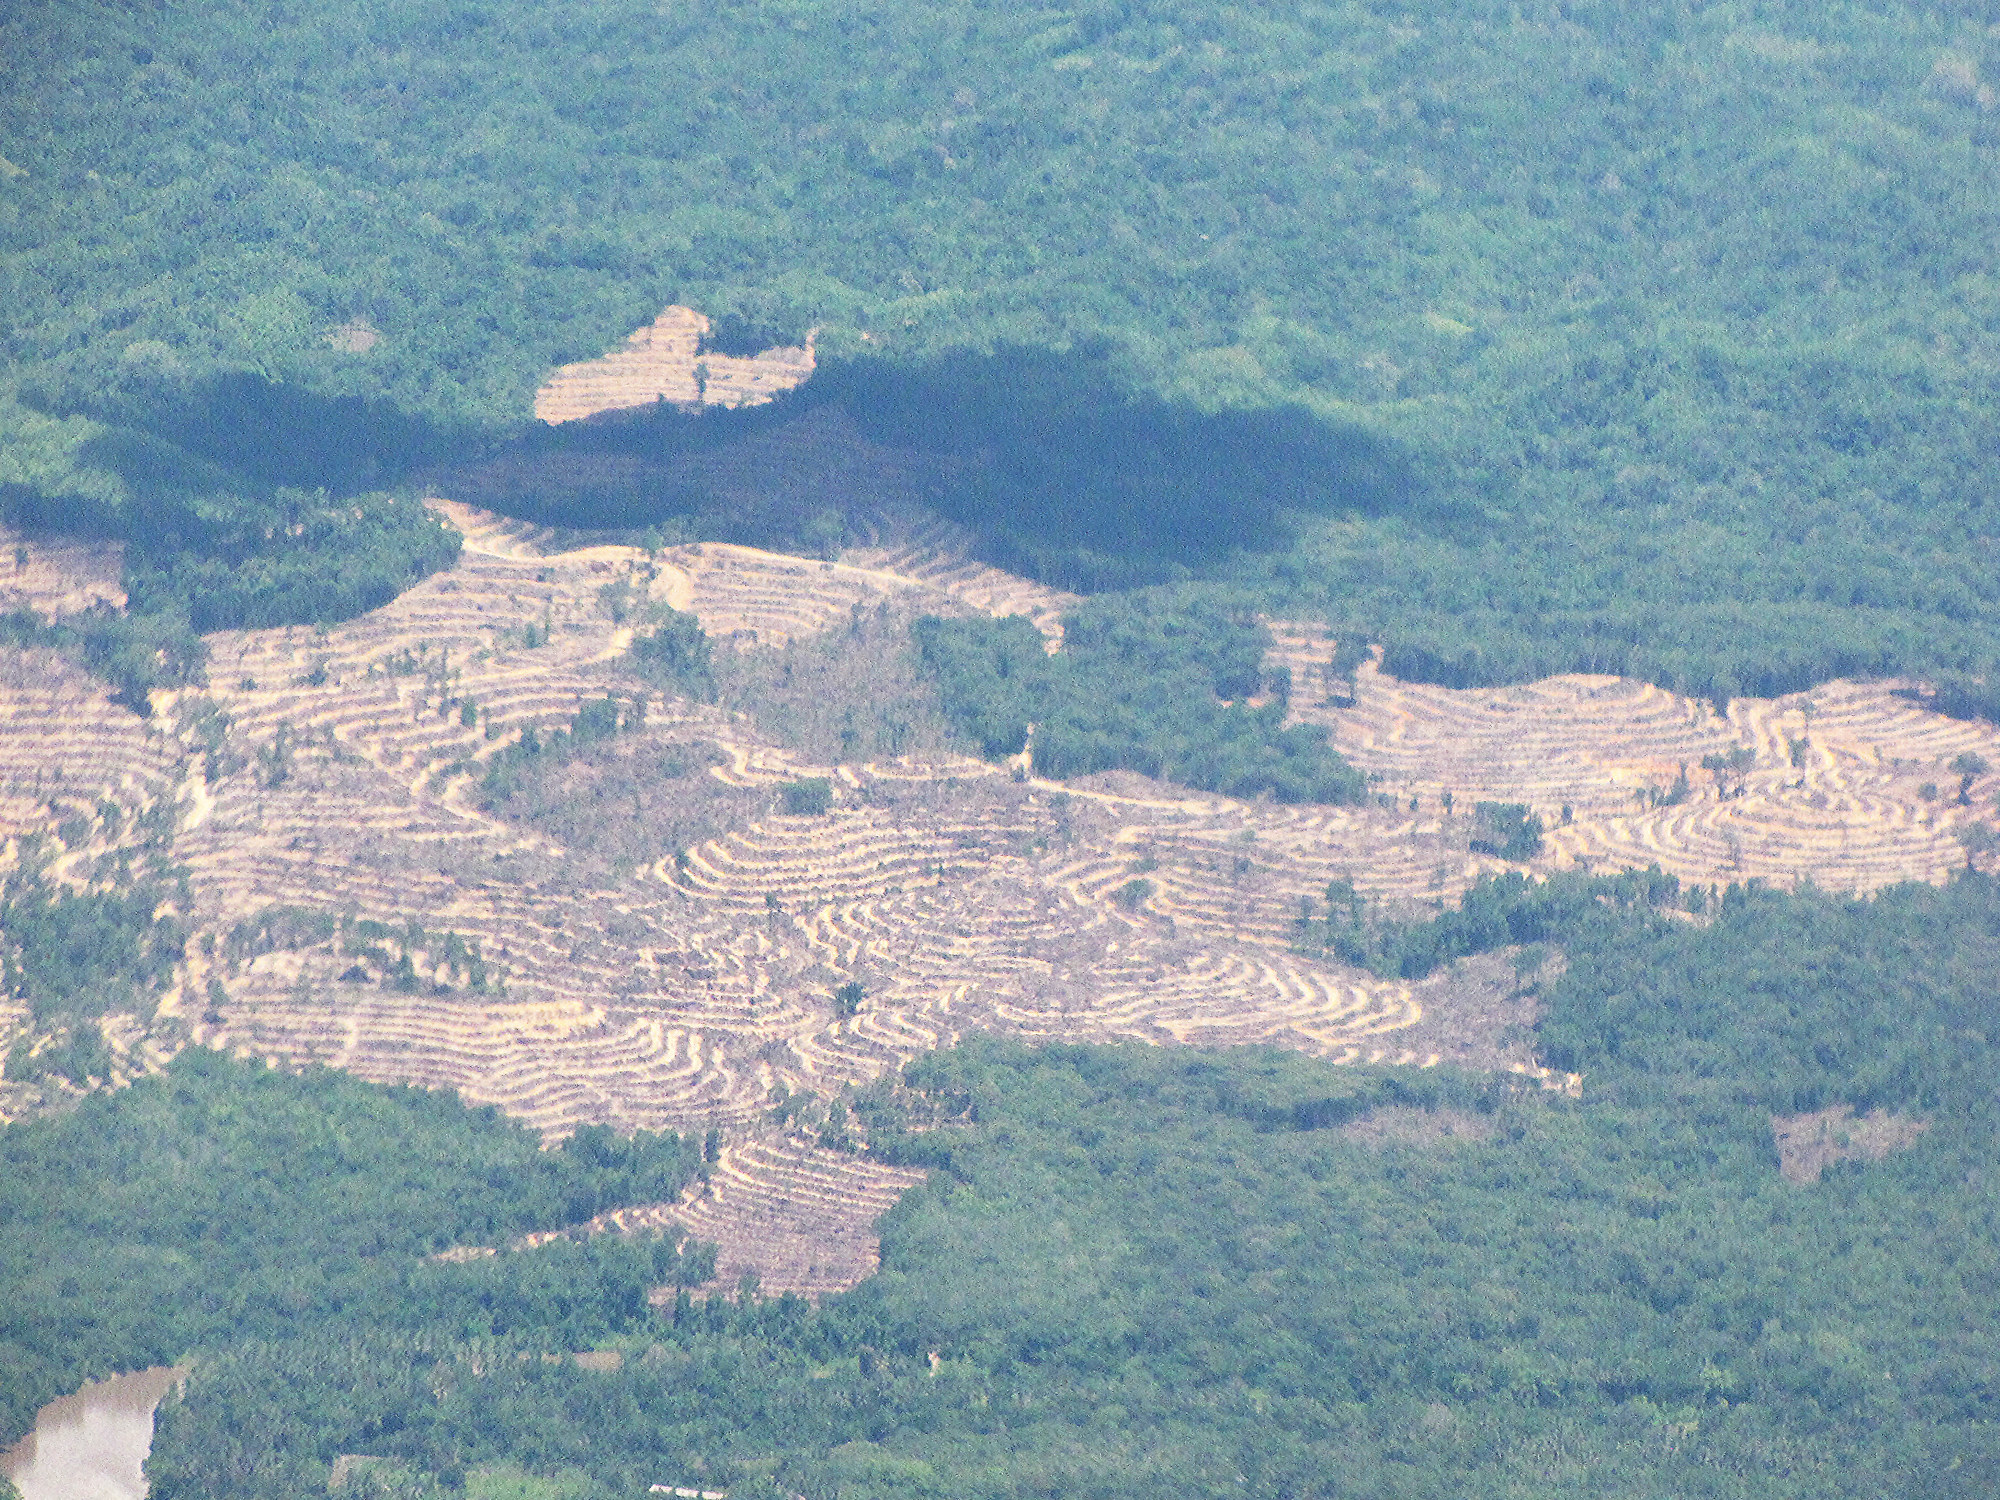 deforestation shown with bare patches of ground